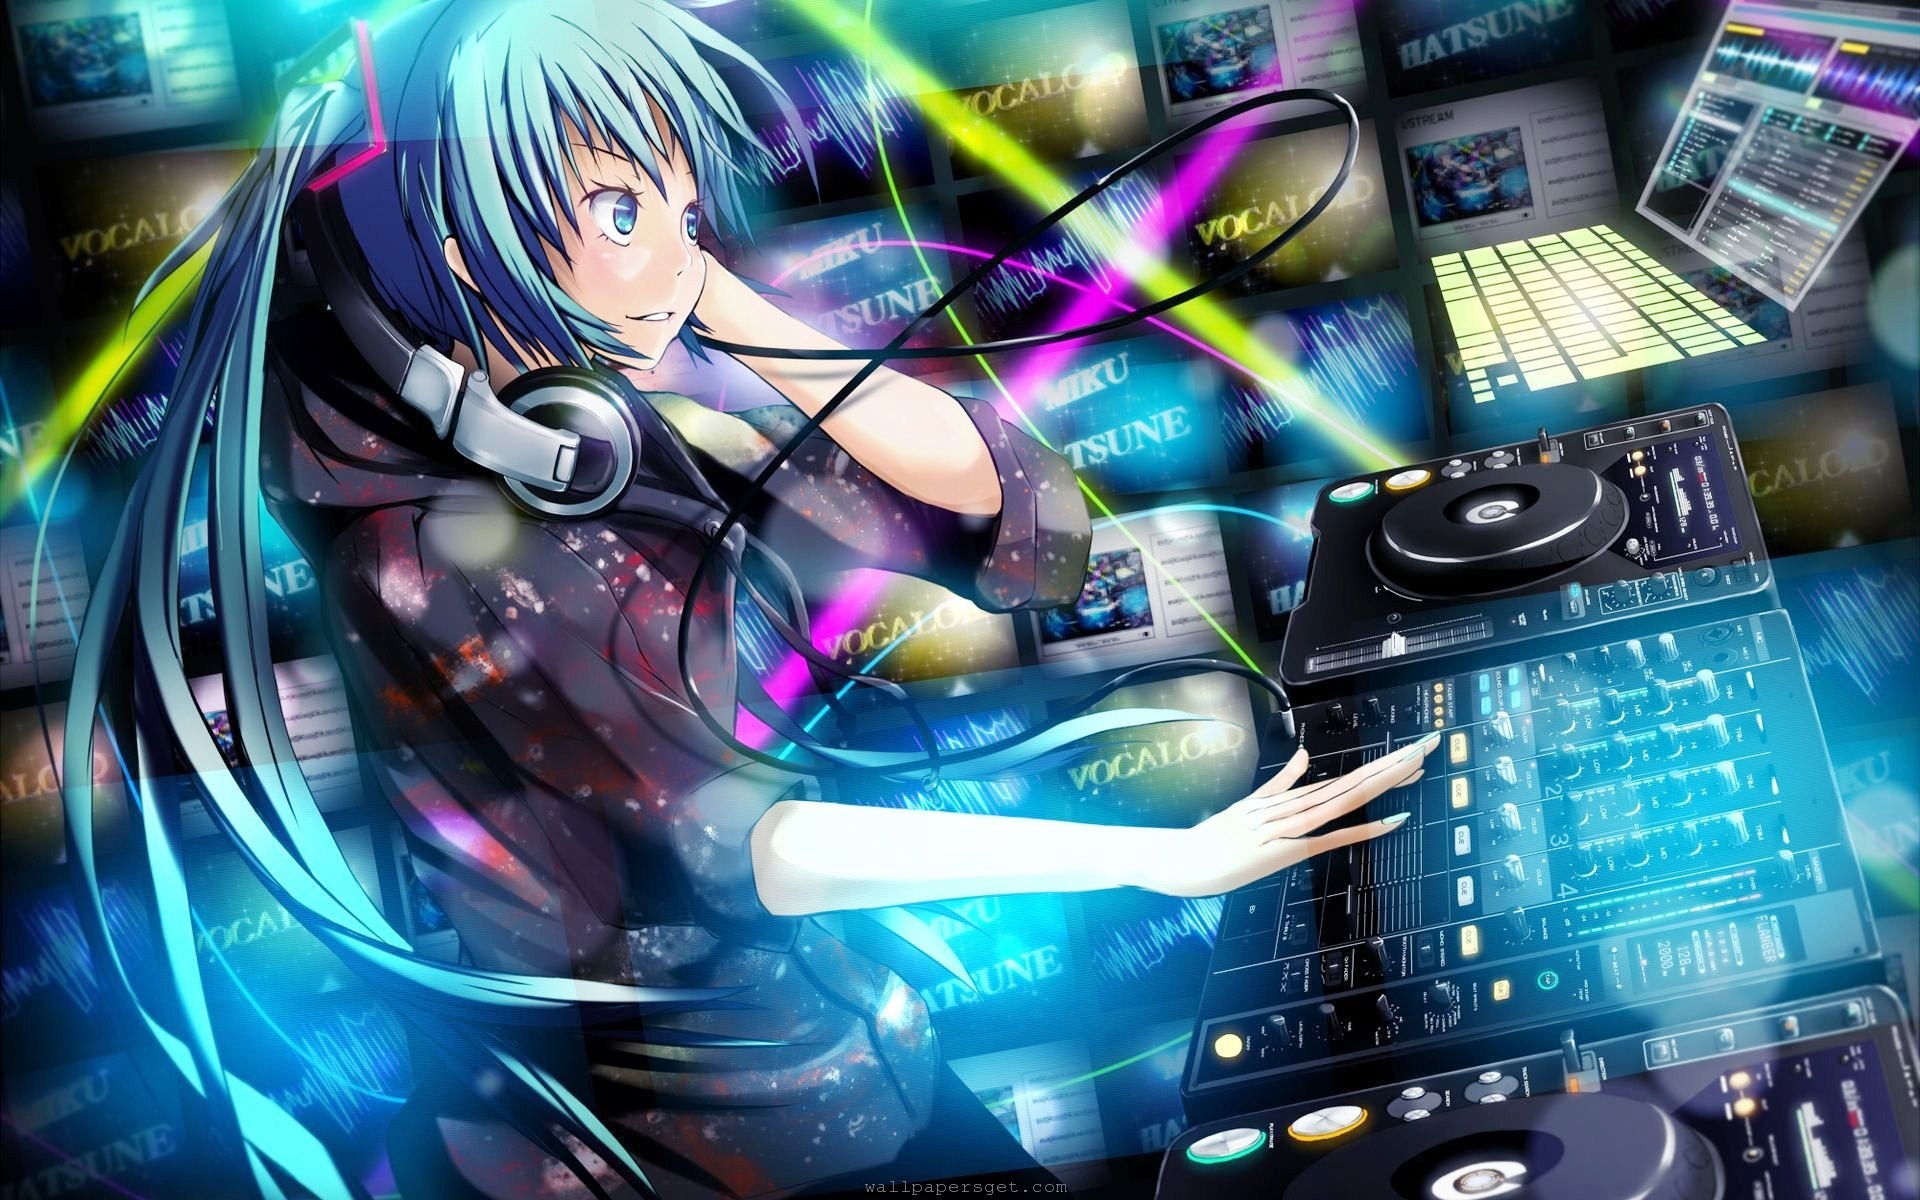 Anime music thrives in an obscure computerbased rhythm game